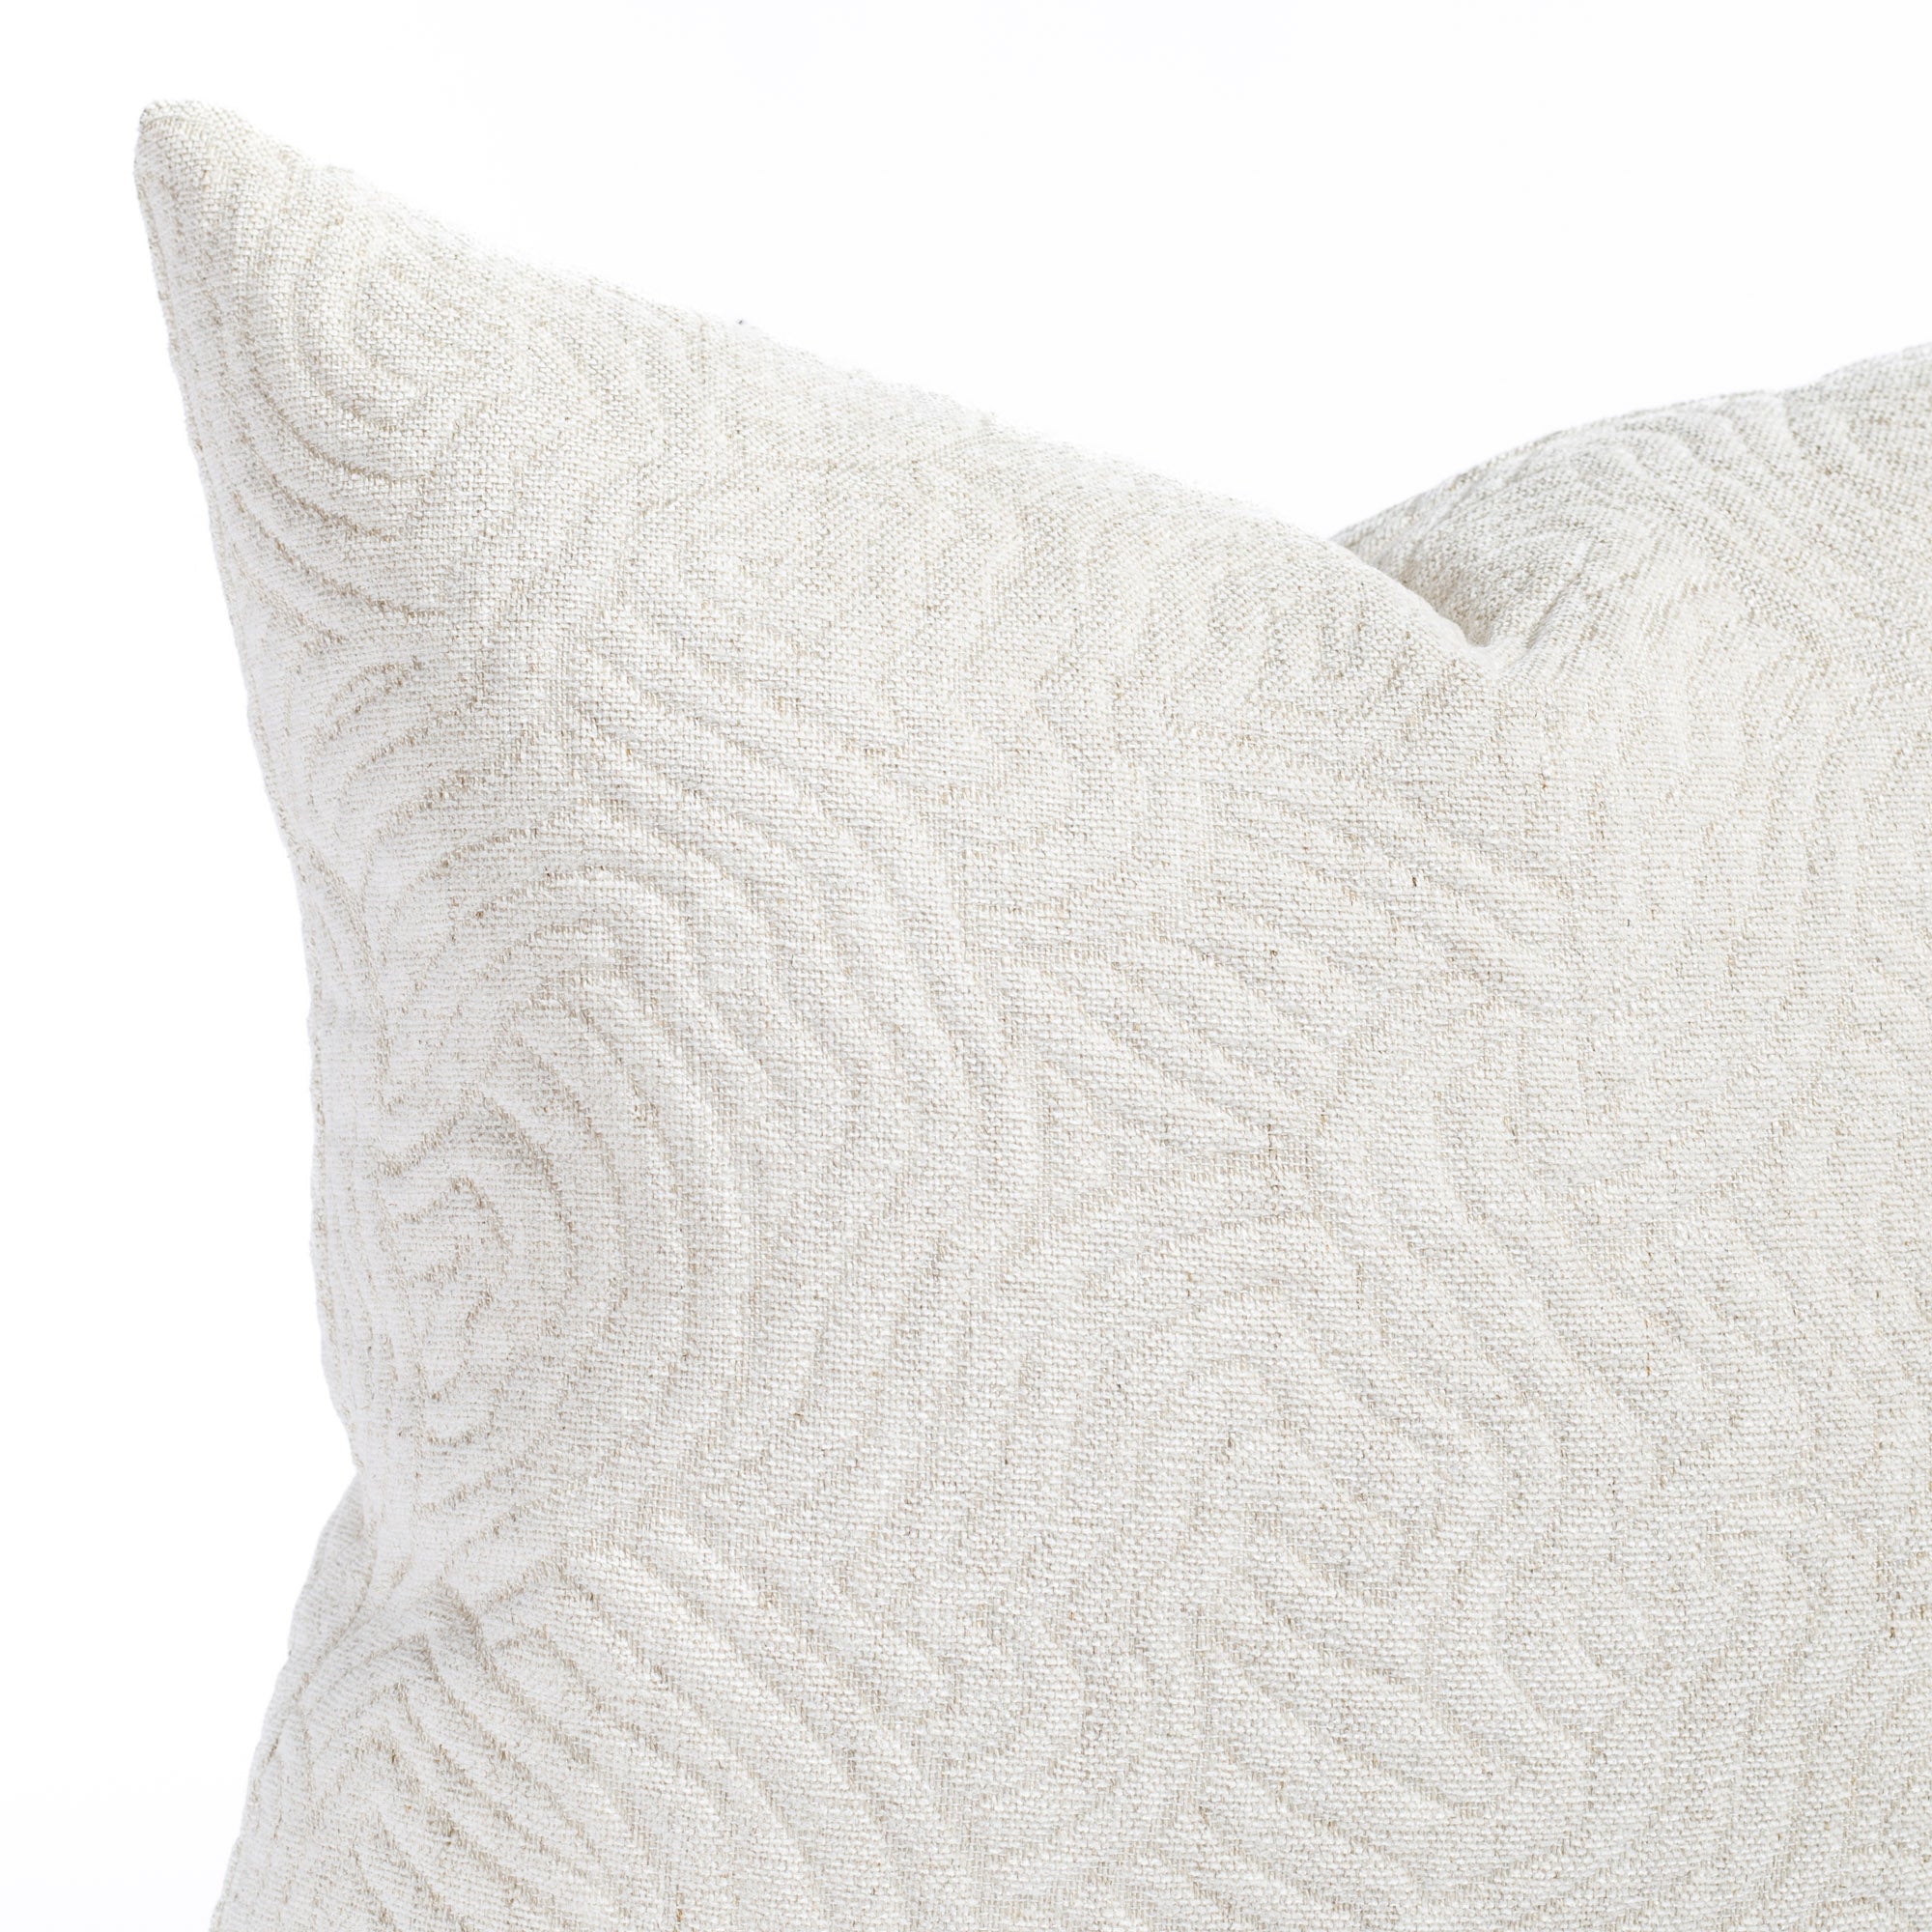 a quilted white abstract patterned pillow : close up view